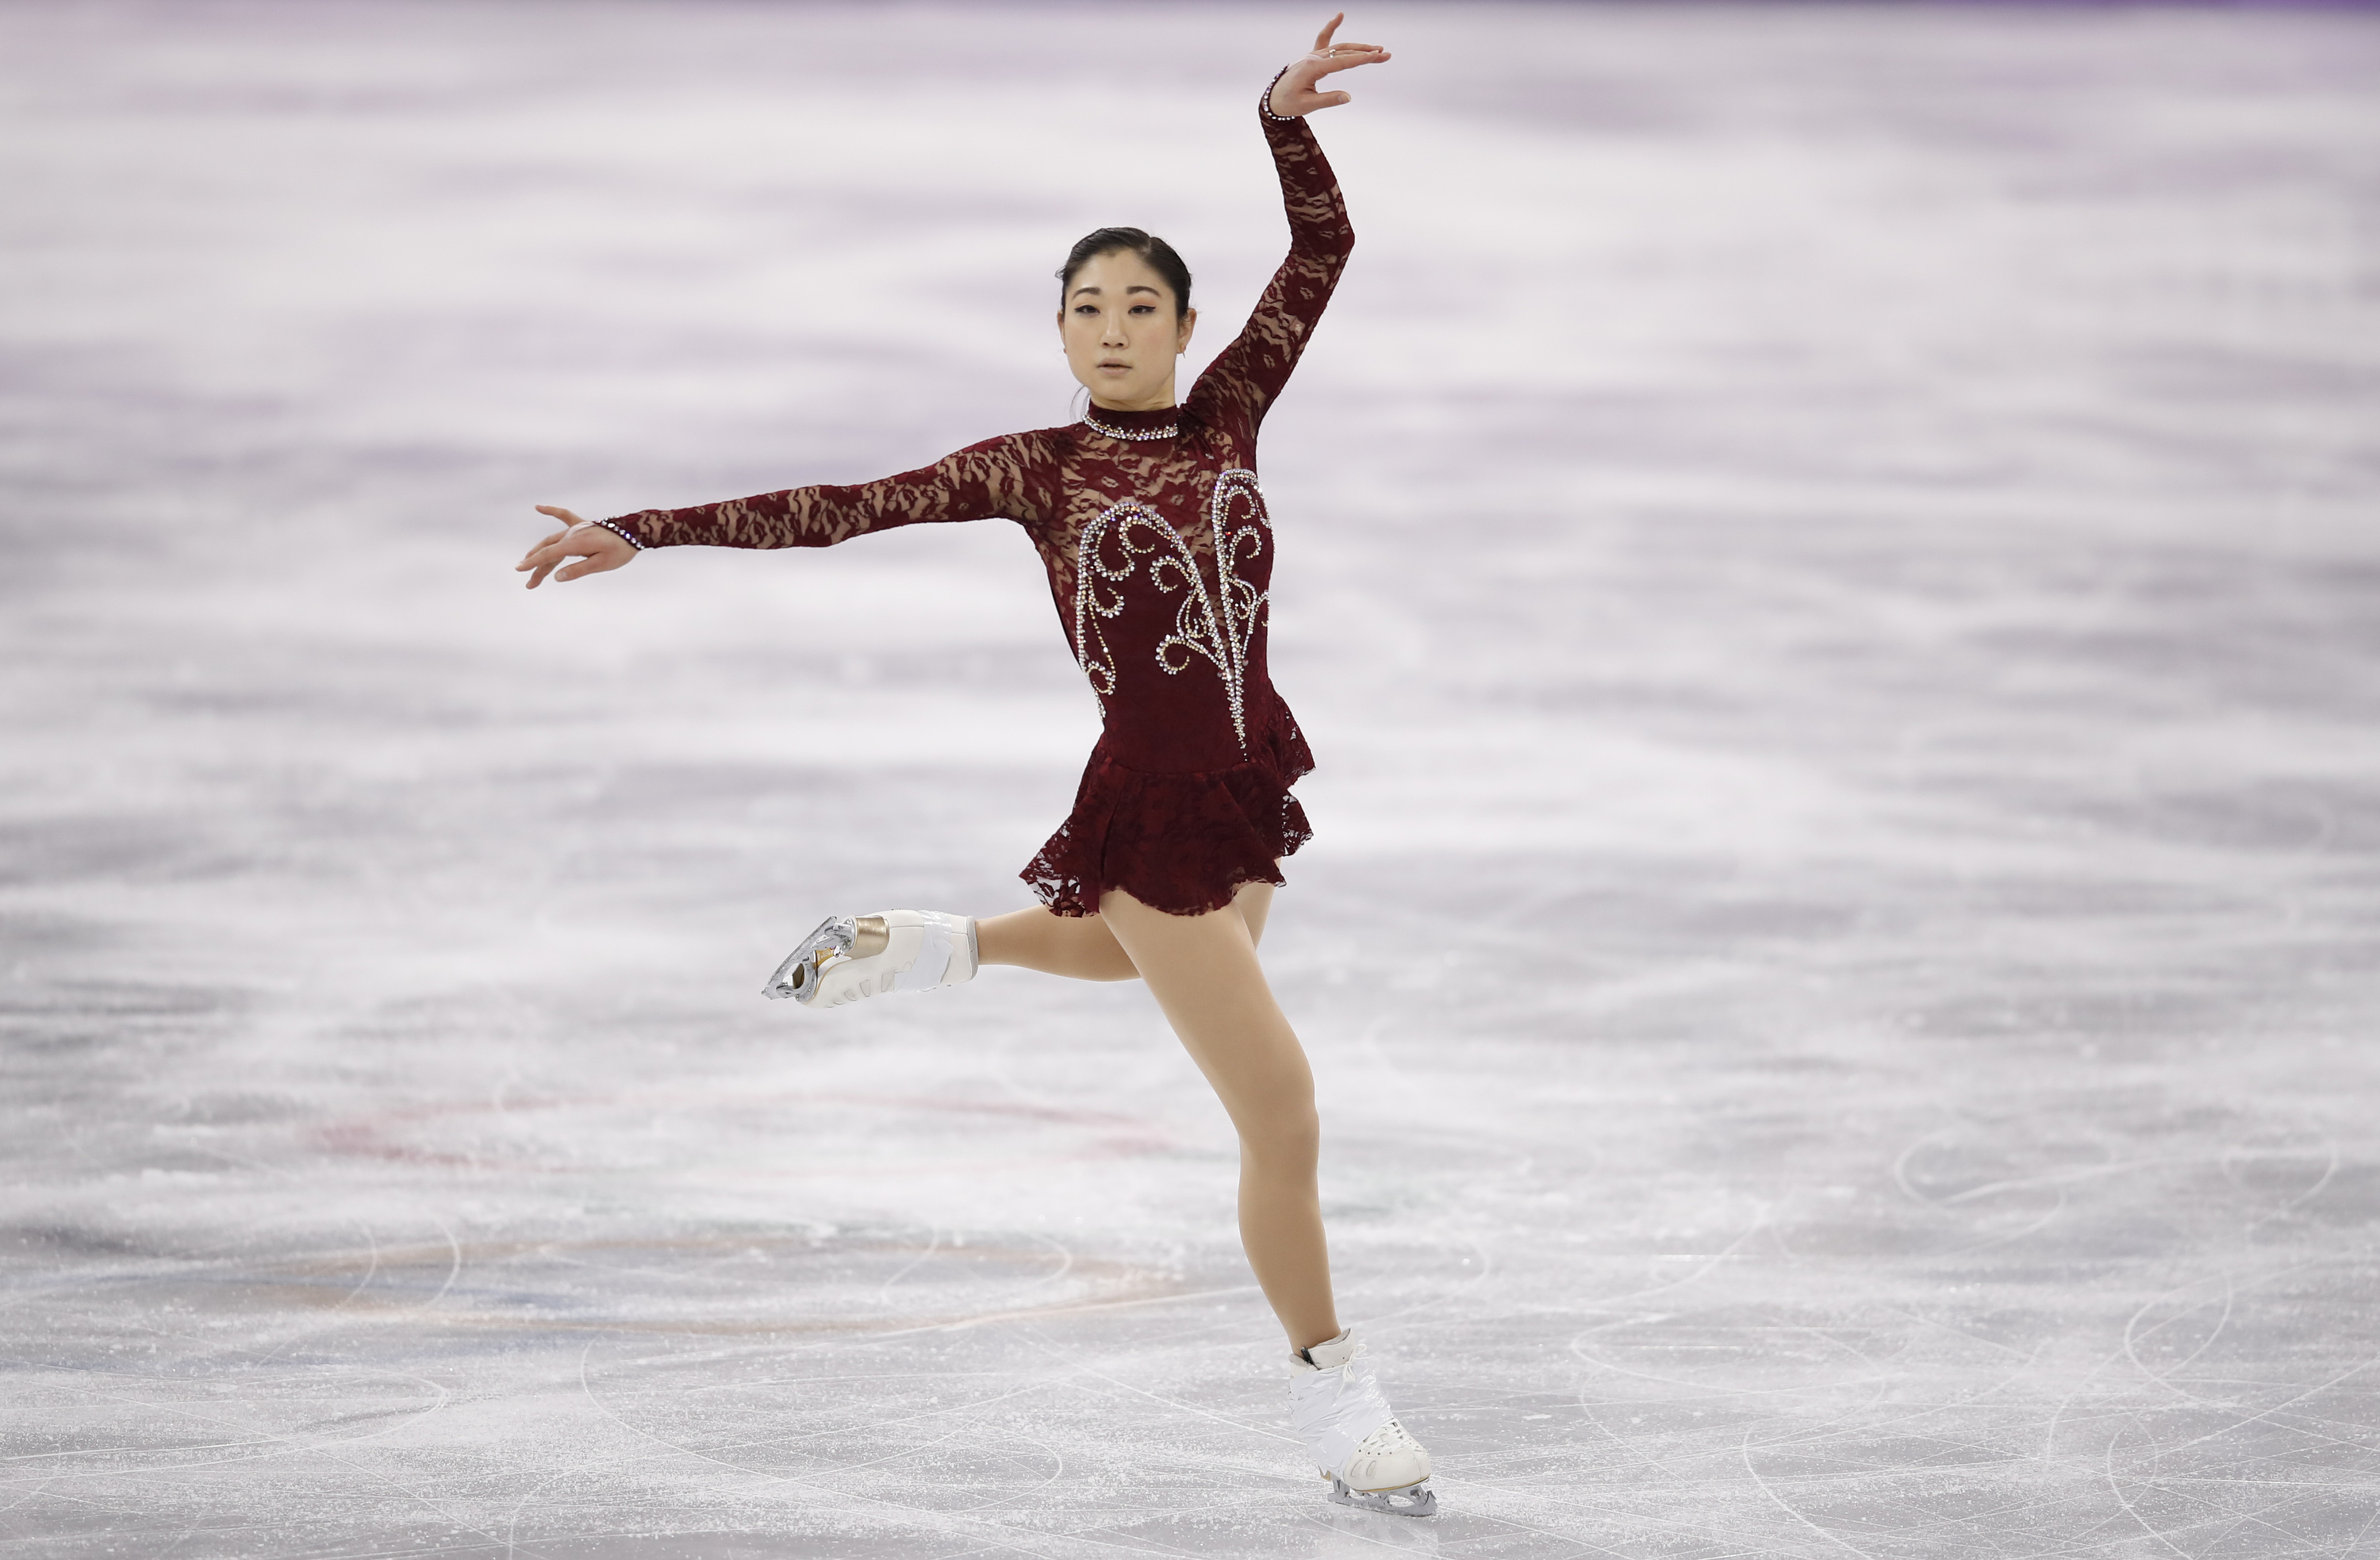 Mirai Nagasu of the United States falls while competing during the Ladies Single Skating Short Program on day twelve of the PyeongChang 2018 Winter Olympic Games at Gangneung Ice Arena on February 21, 2018 in Gangneung, South Korea. (XIN LI—Getty Images)